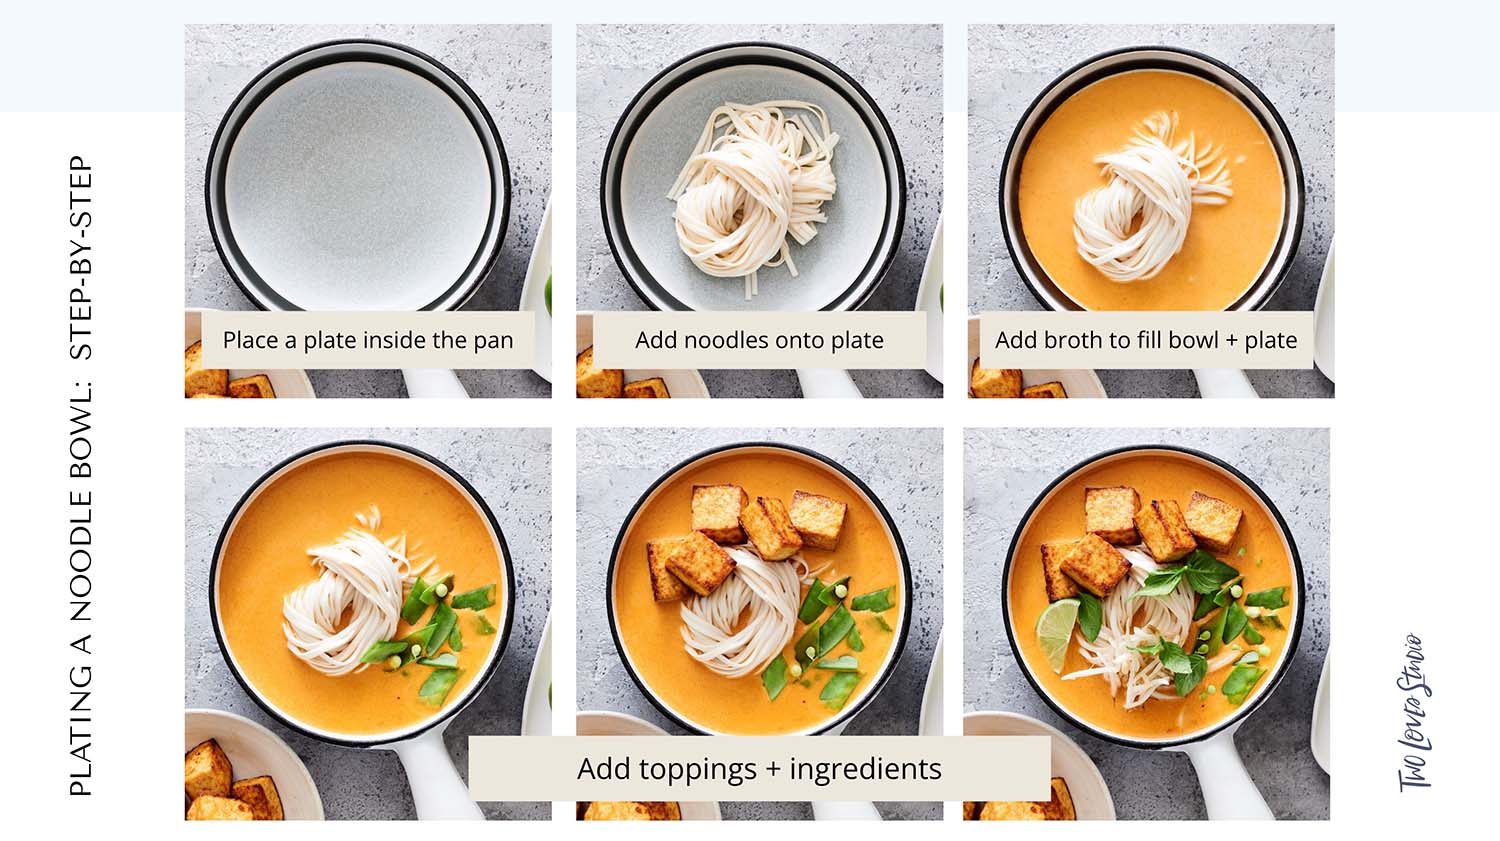 6 images of a laksa noodle soup presented in a step-by-step image process of how to build create noodle food styling